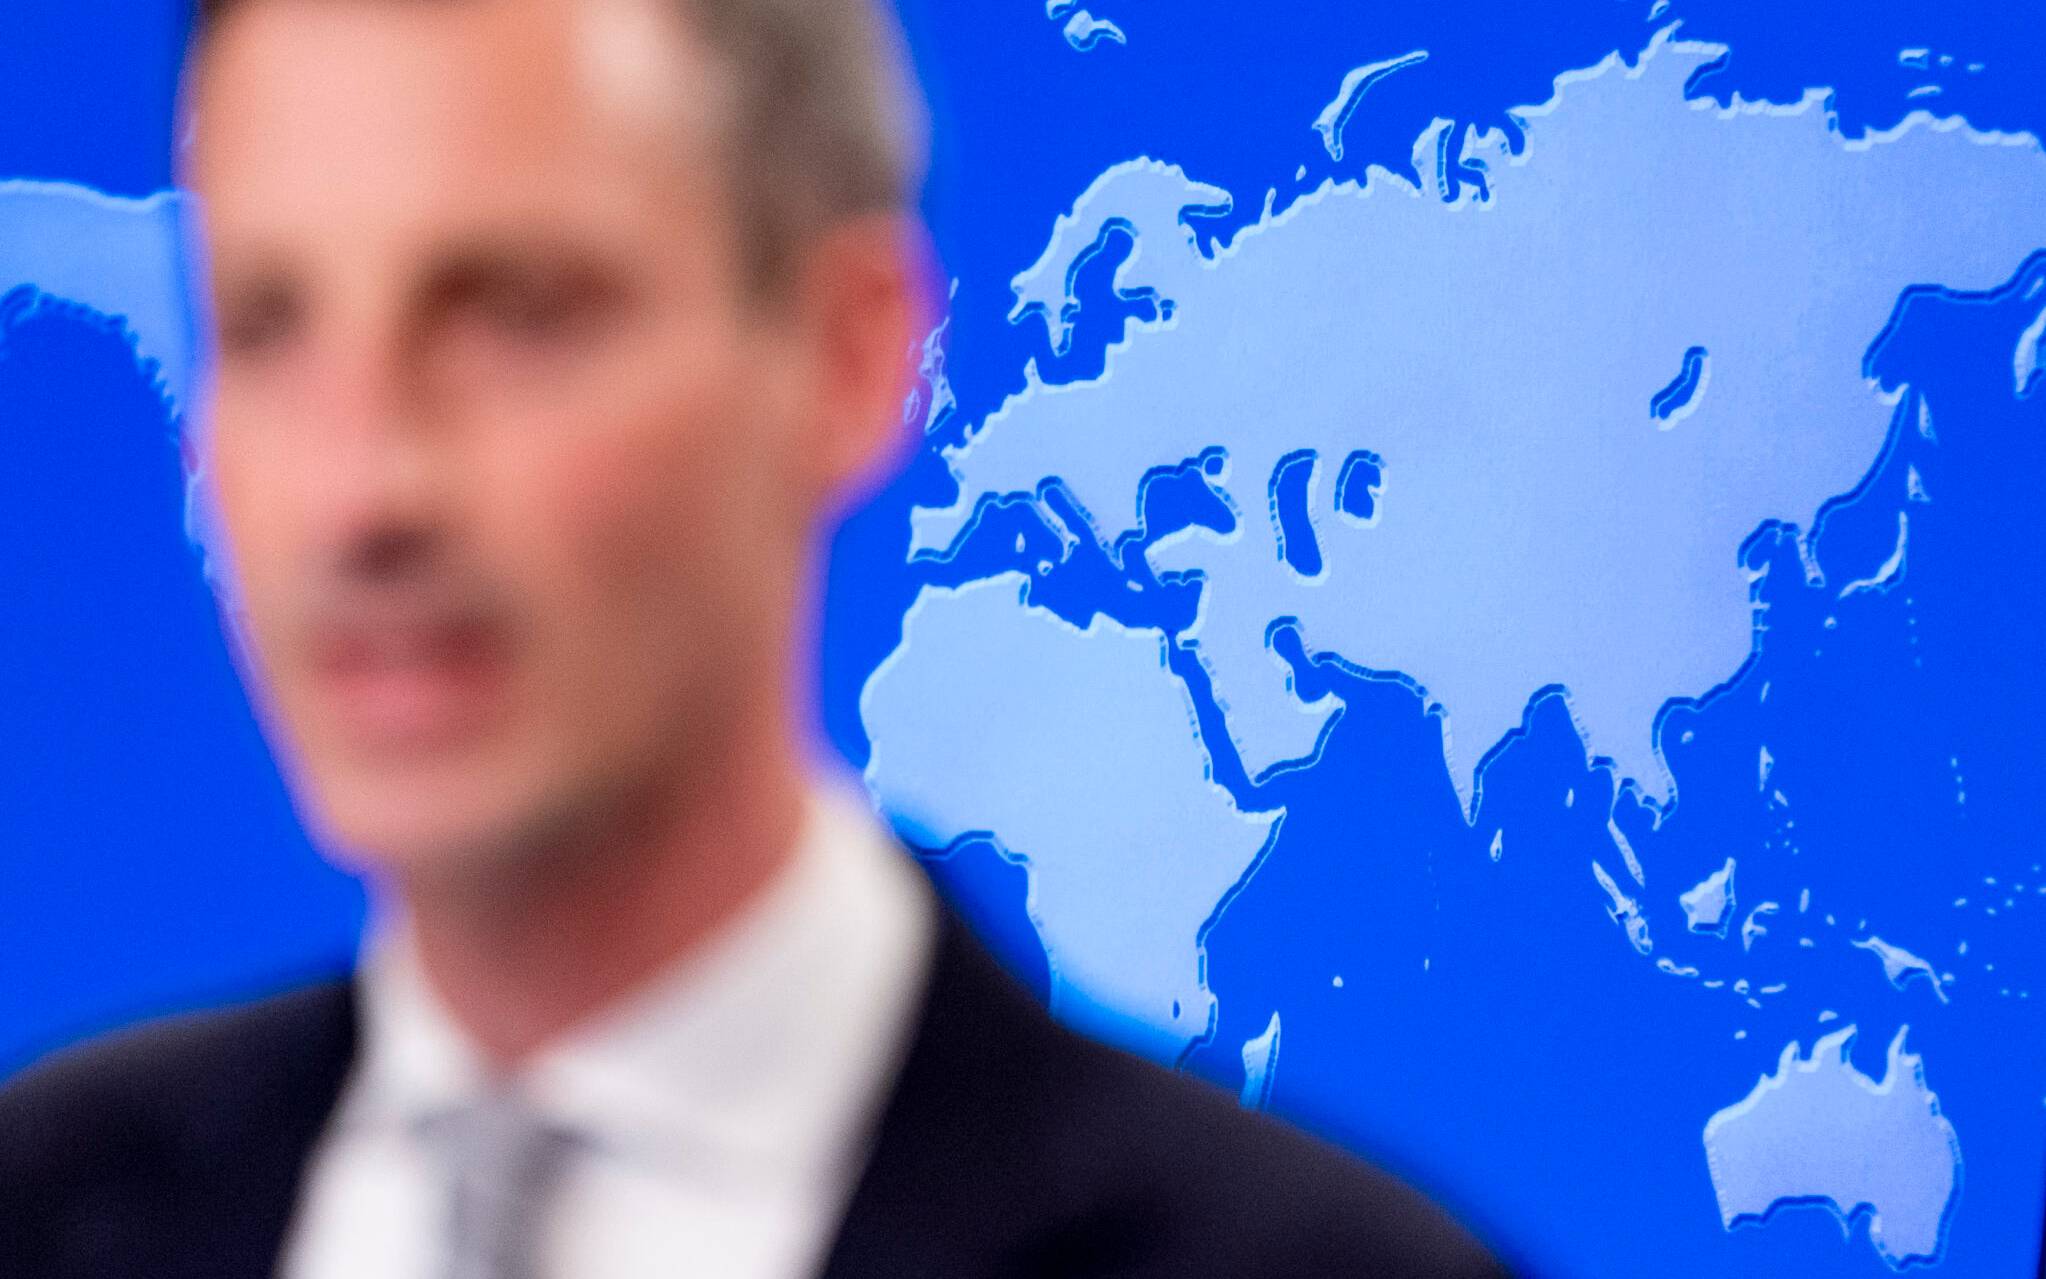 A map of the world is visible behind State Department spokesman Ned Price speaks during a news conference at the State Department in Washington, February 28, 2022. (Photo by Andrew Harnik / POOL / AFP)